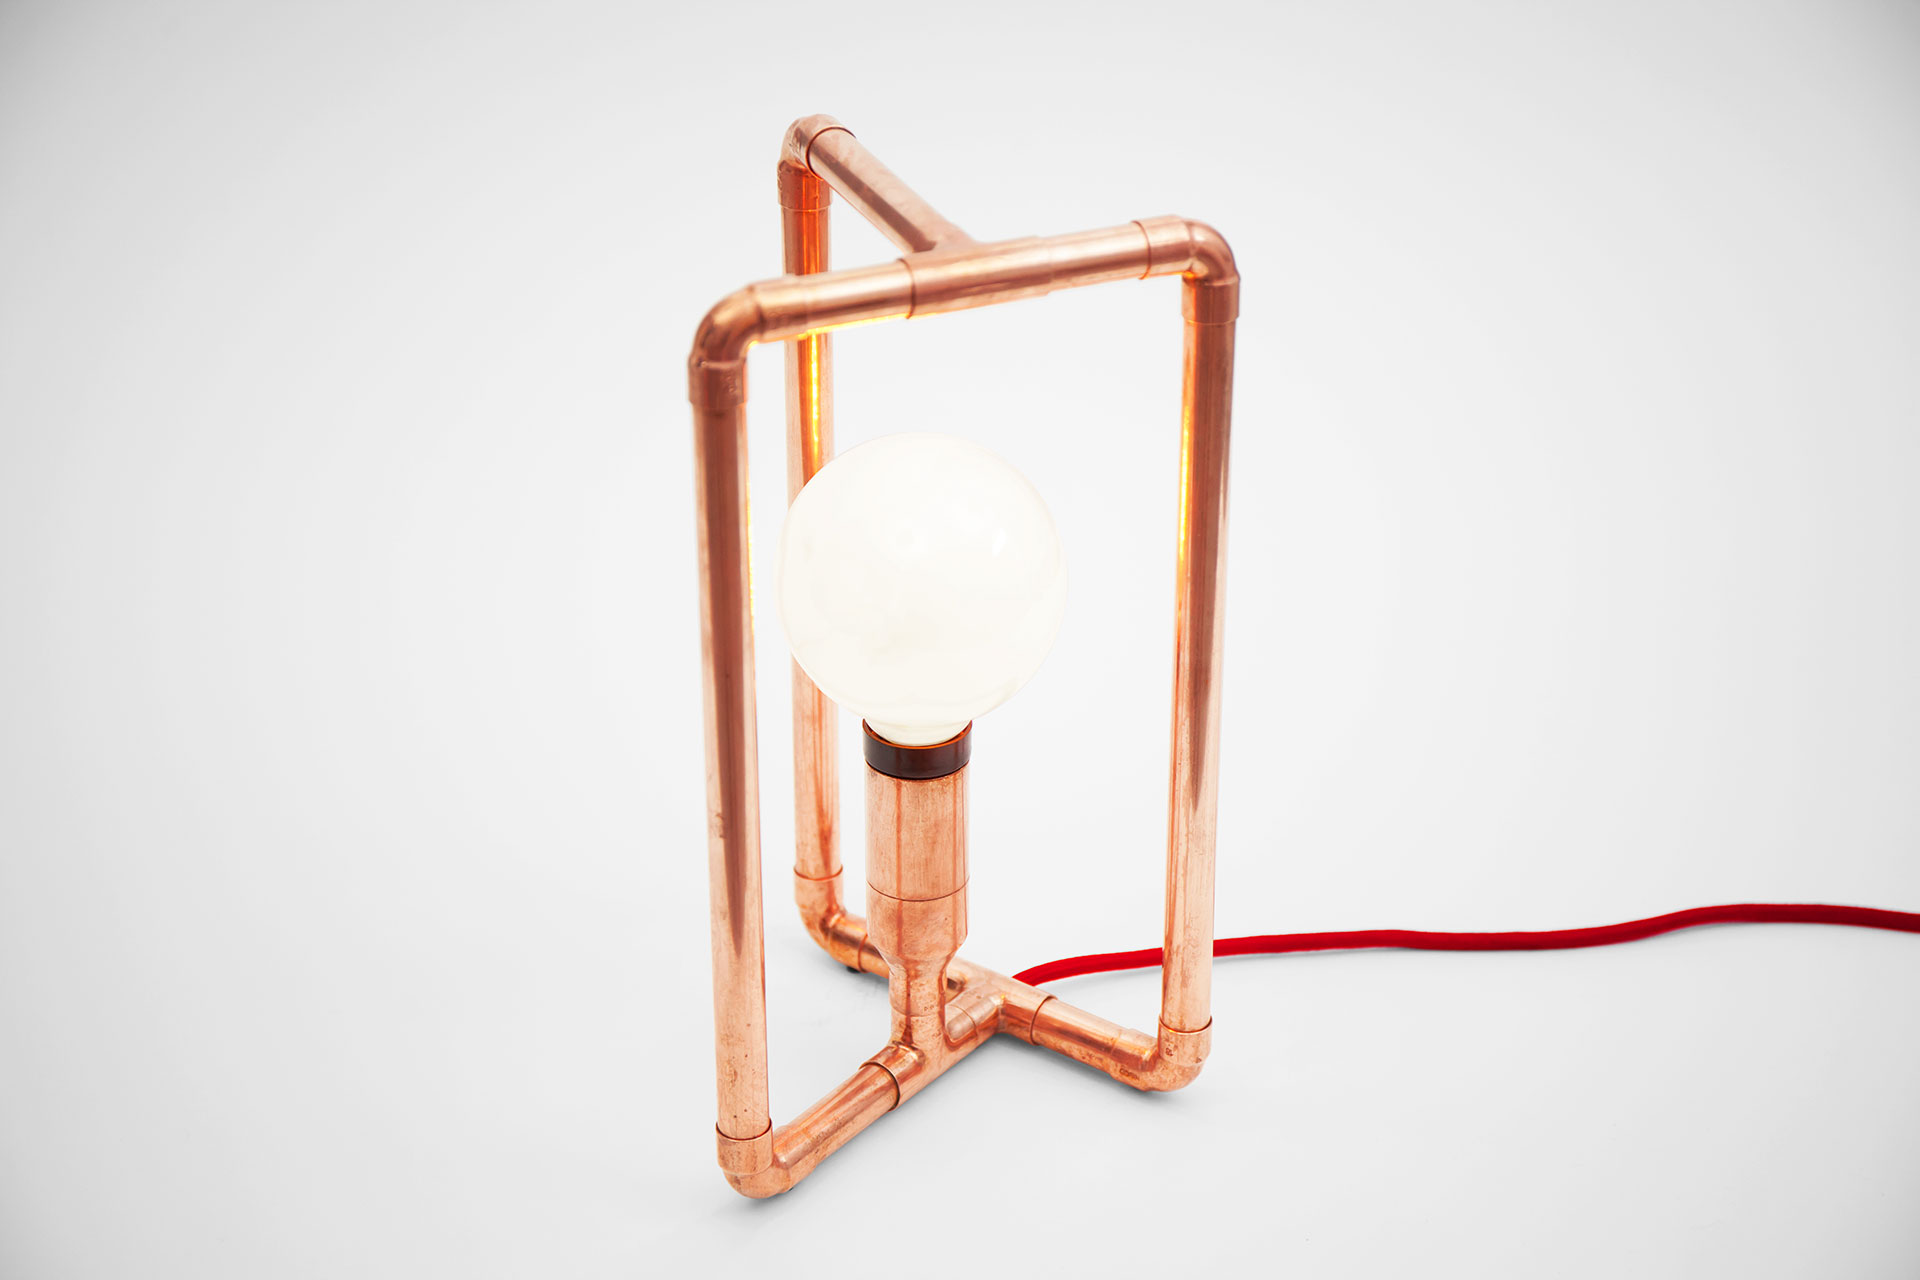 Geometric design desk lamp made of copper tubing with red braided cord inspired by 3D Möbius strip